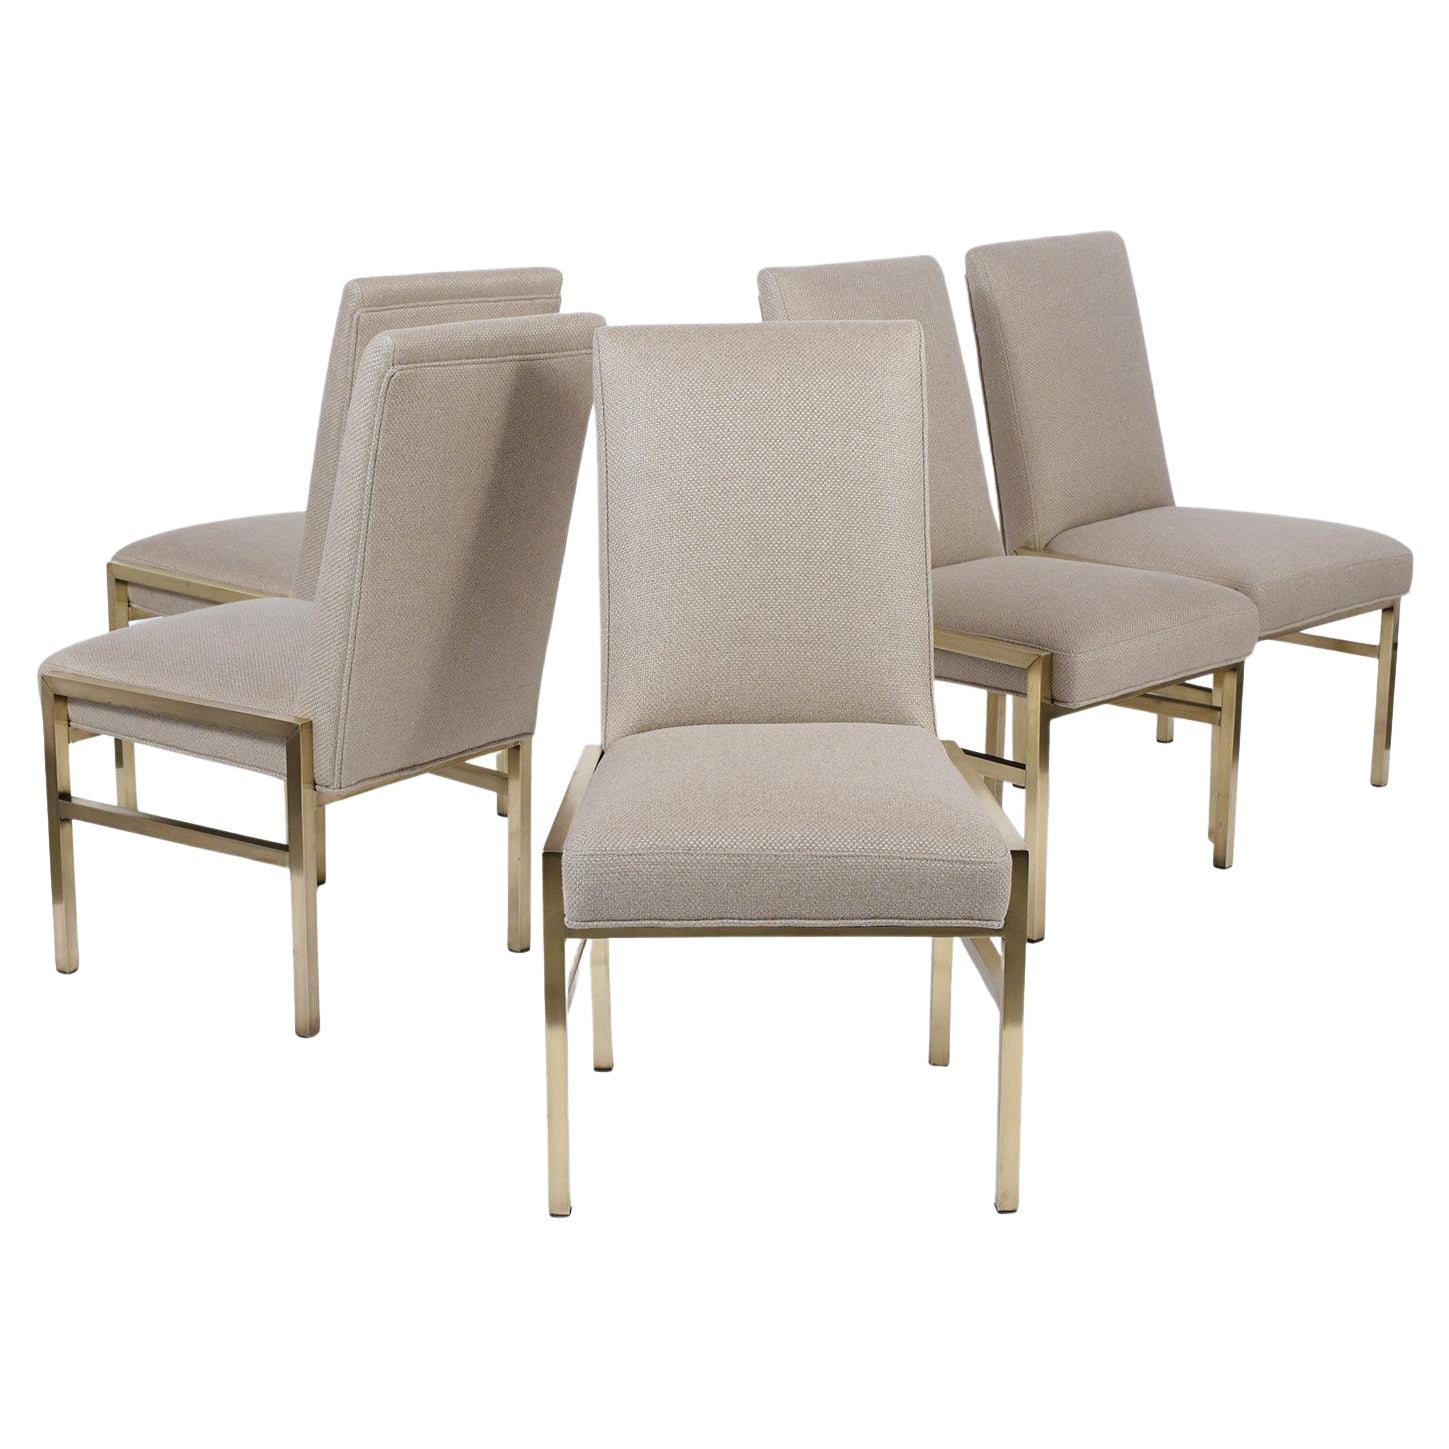 A remarkable mid-century modern 1960s set of eight Mastercraft dining room chairs are hand-crafted out-of-brass and are in great condition, have been completely restored, and are upholstered by our expert professional craftsman team in the house.